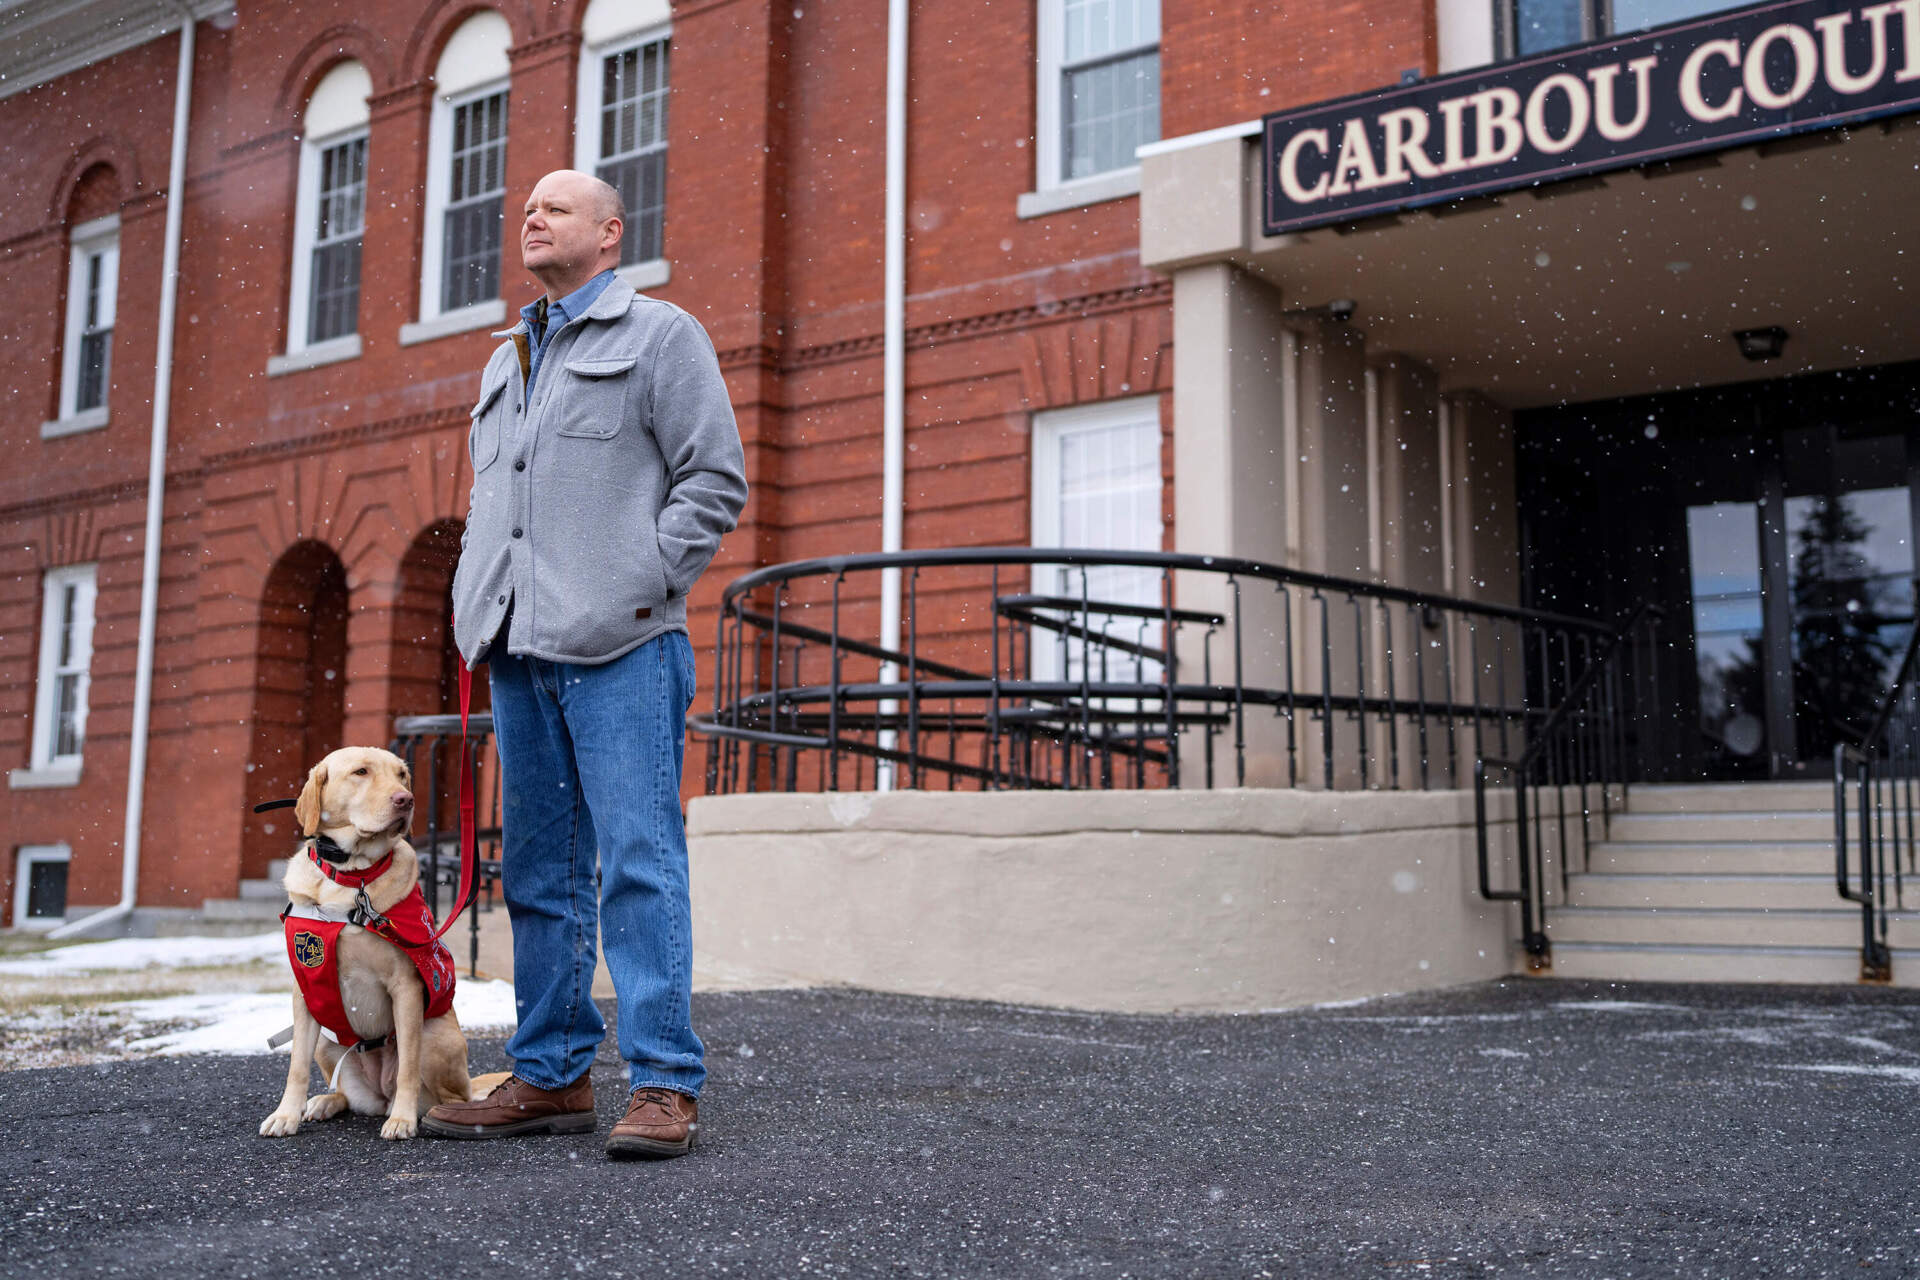 District Attorney Todd Collins outside the Aroostook County Superior Court in Caribou. (Ashley L. Conti for The New York Times)